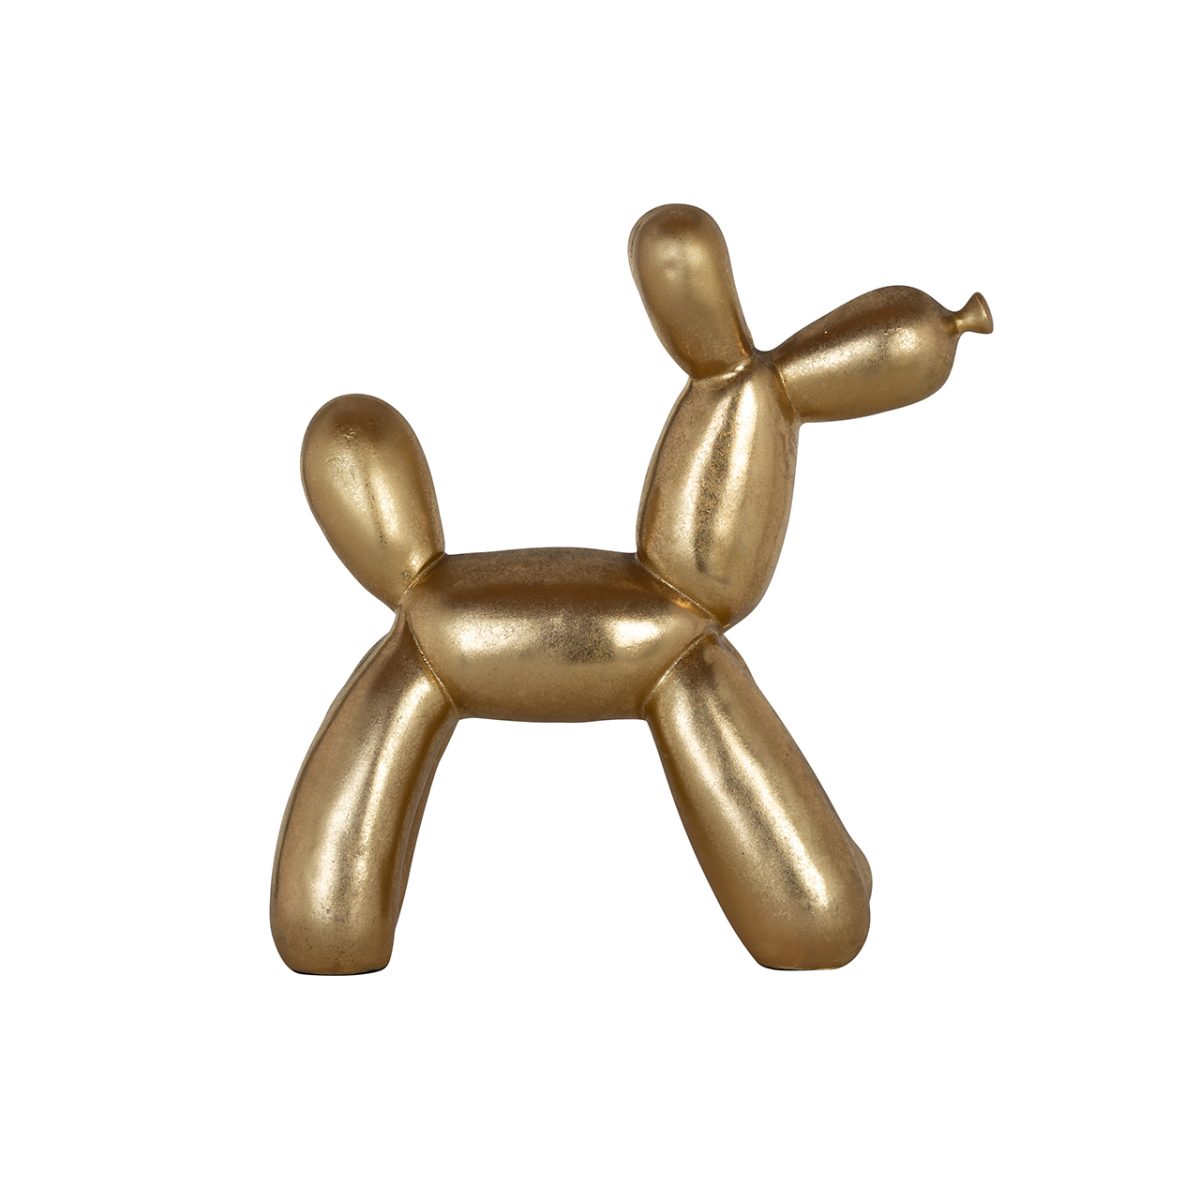 -AD-0006 - Dog deco object (Gold)